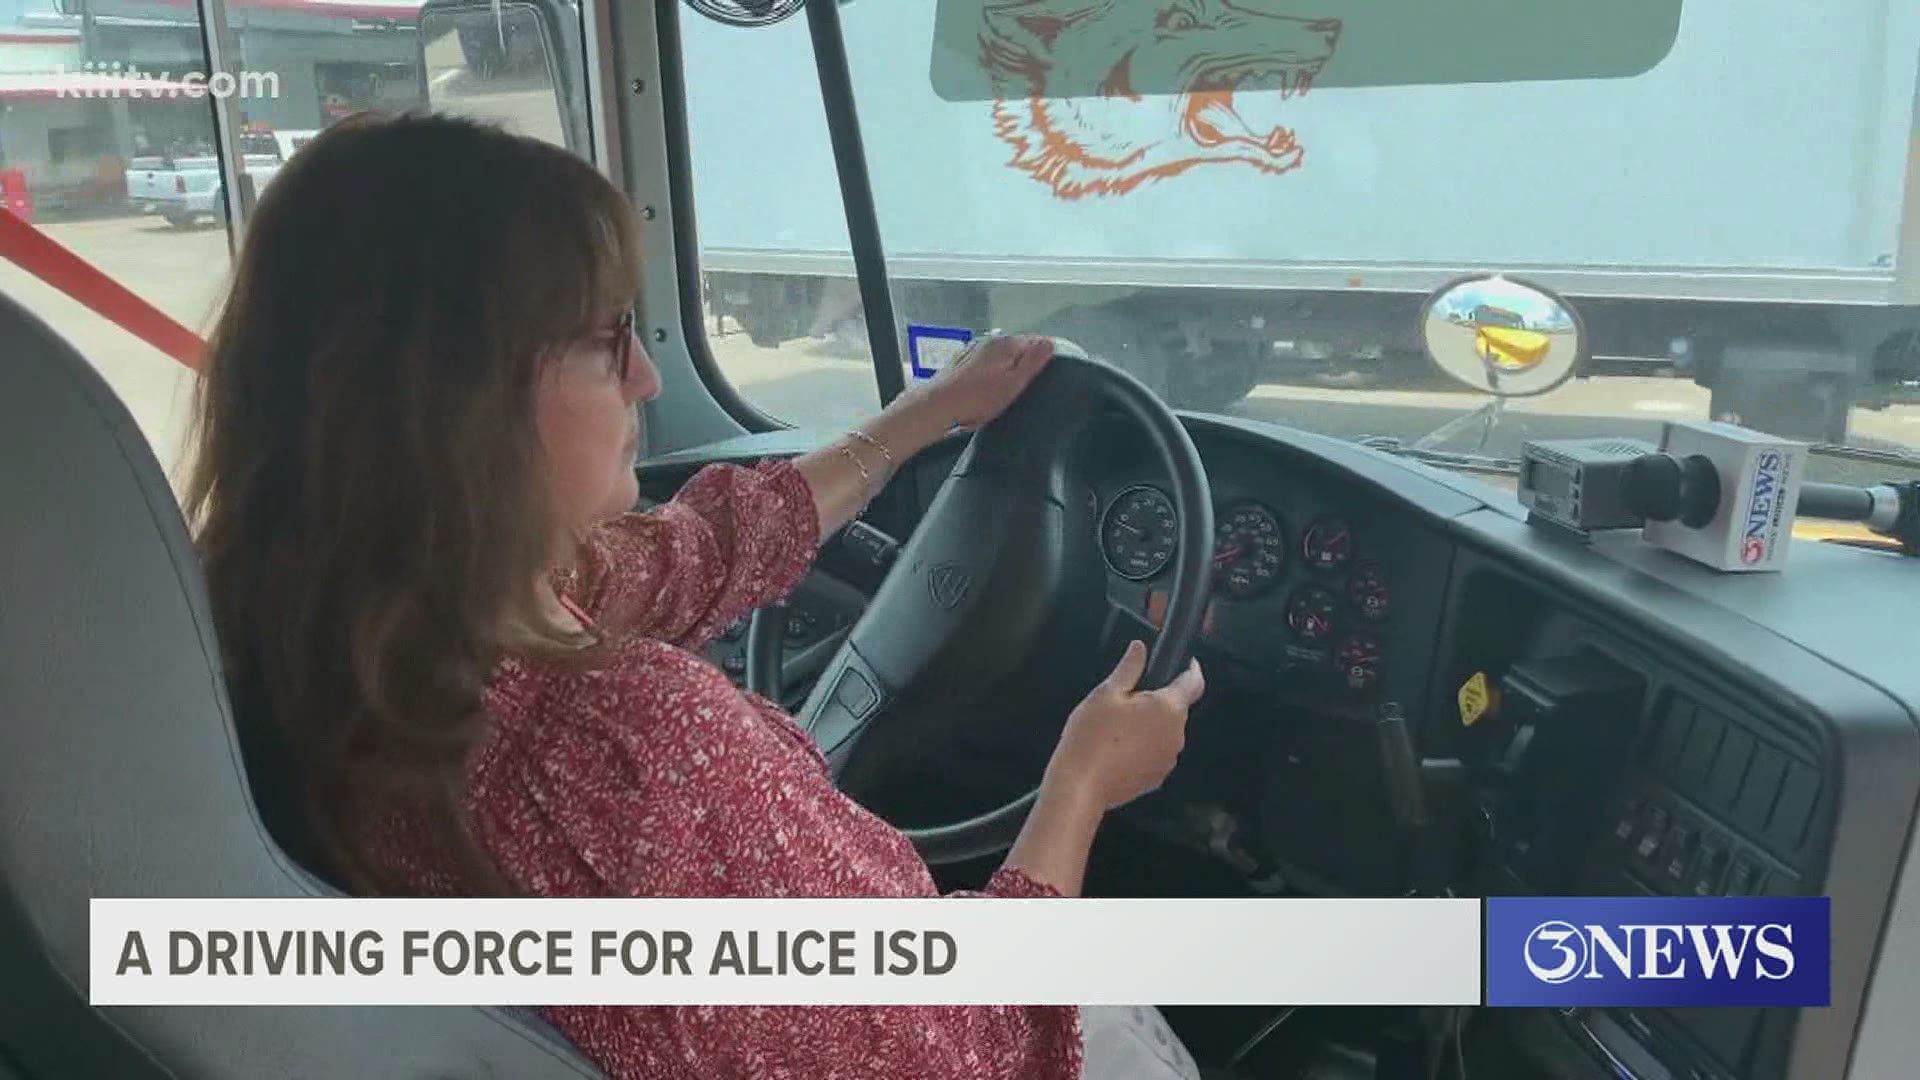 Gonzalez was just named Bus Driver of the Year for Alice ISD. What a year it was: navigating COVID protocols and keeping children safe.